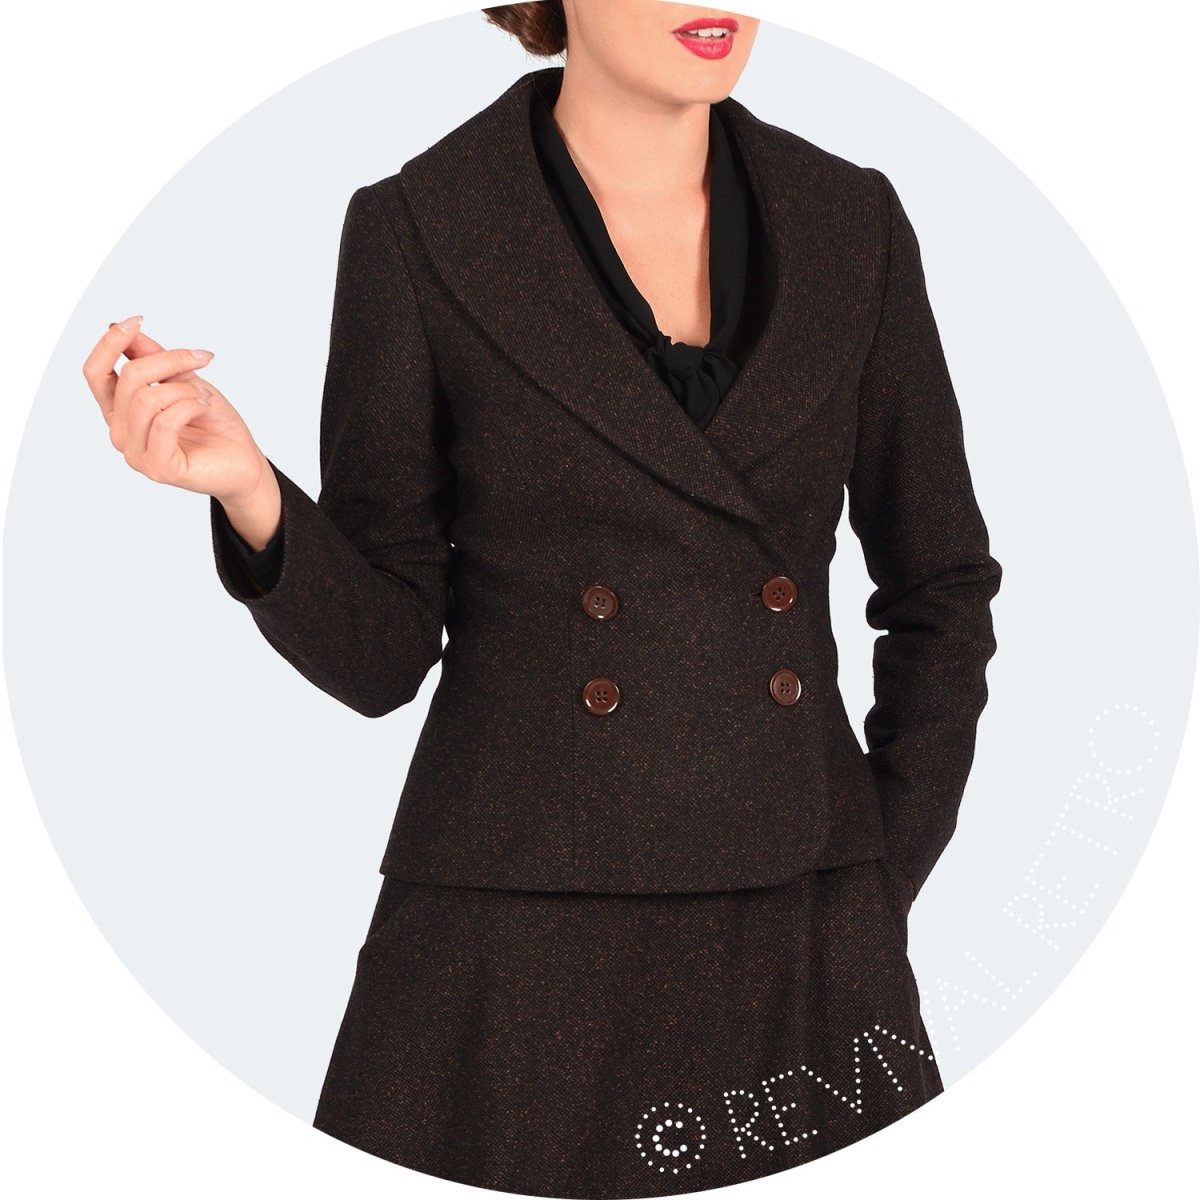 Womens double breasted suit jacket with shawl collar